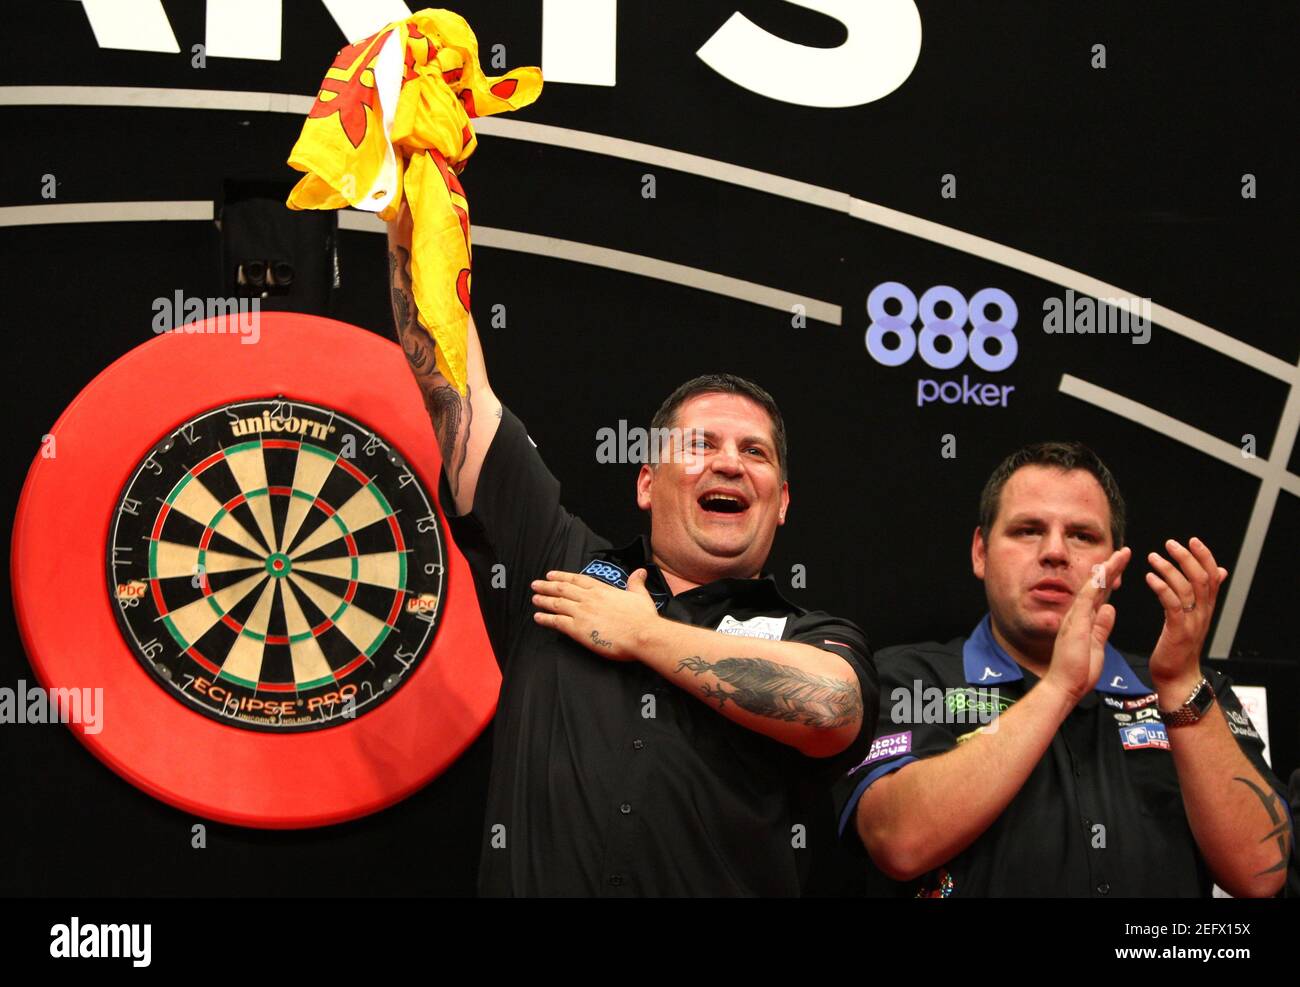 Darts - 888.com Premier League Darts Play-Offs 2011 - Wembley Arena -  19/5/11 Gary Anderson celebrates his win with Adrian Lewis (R) Mandatory  Credit: Action Images / Steven Paston Stock Photo - Alamy